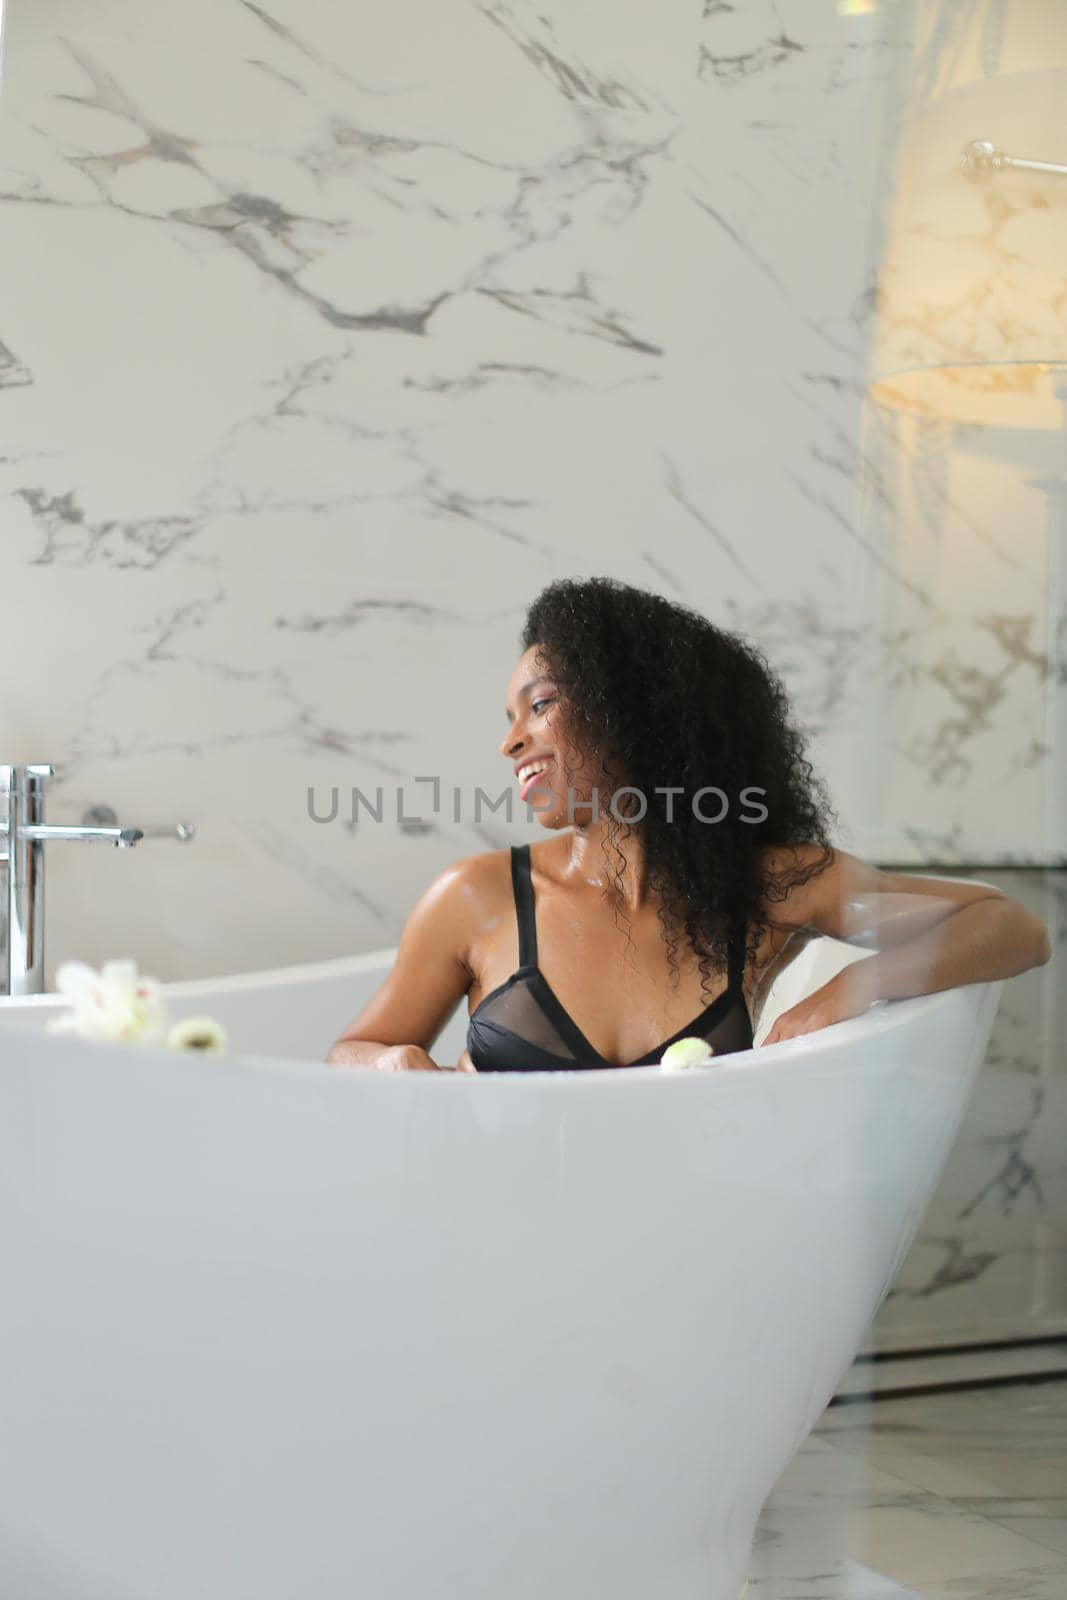 Black girl sittling in bath and wearing underwear, marble wall in background. by sisterspro